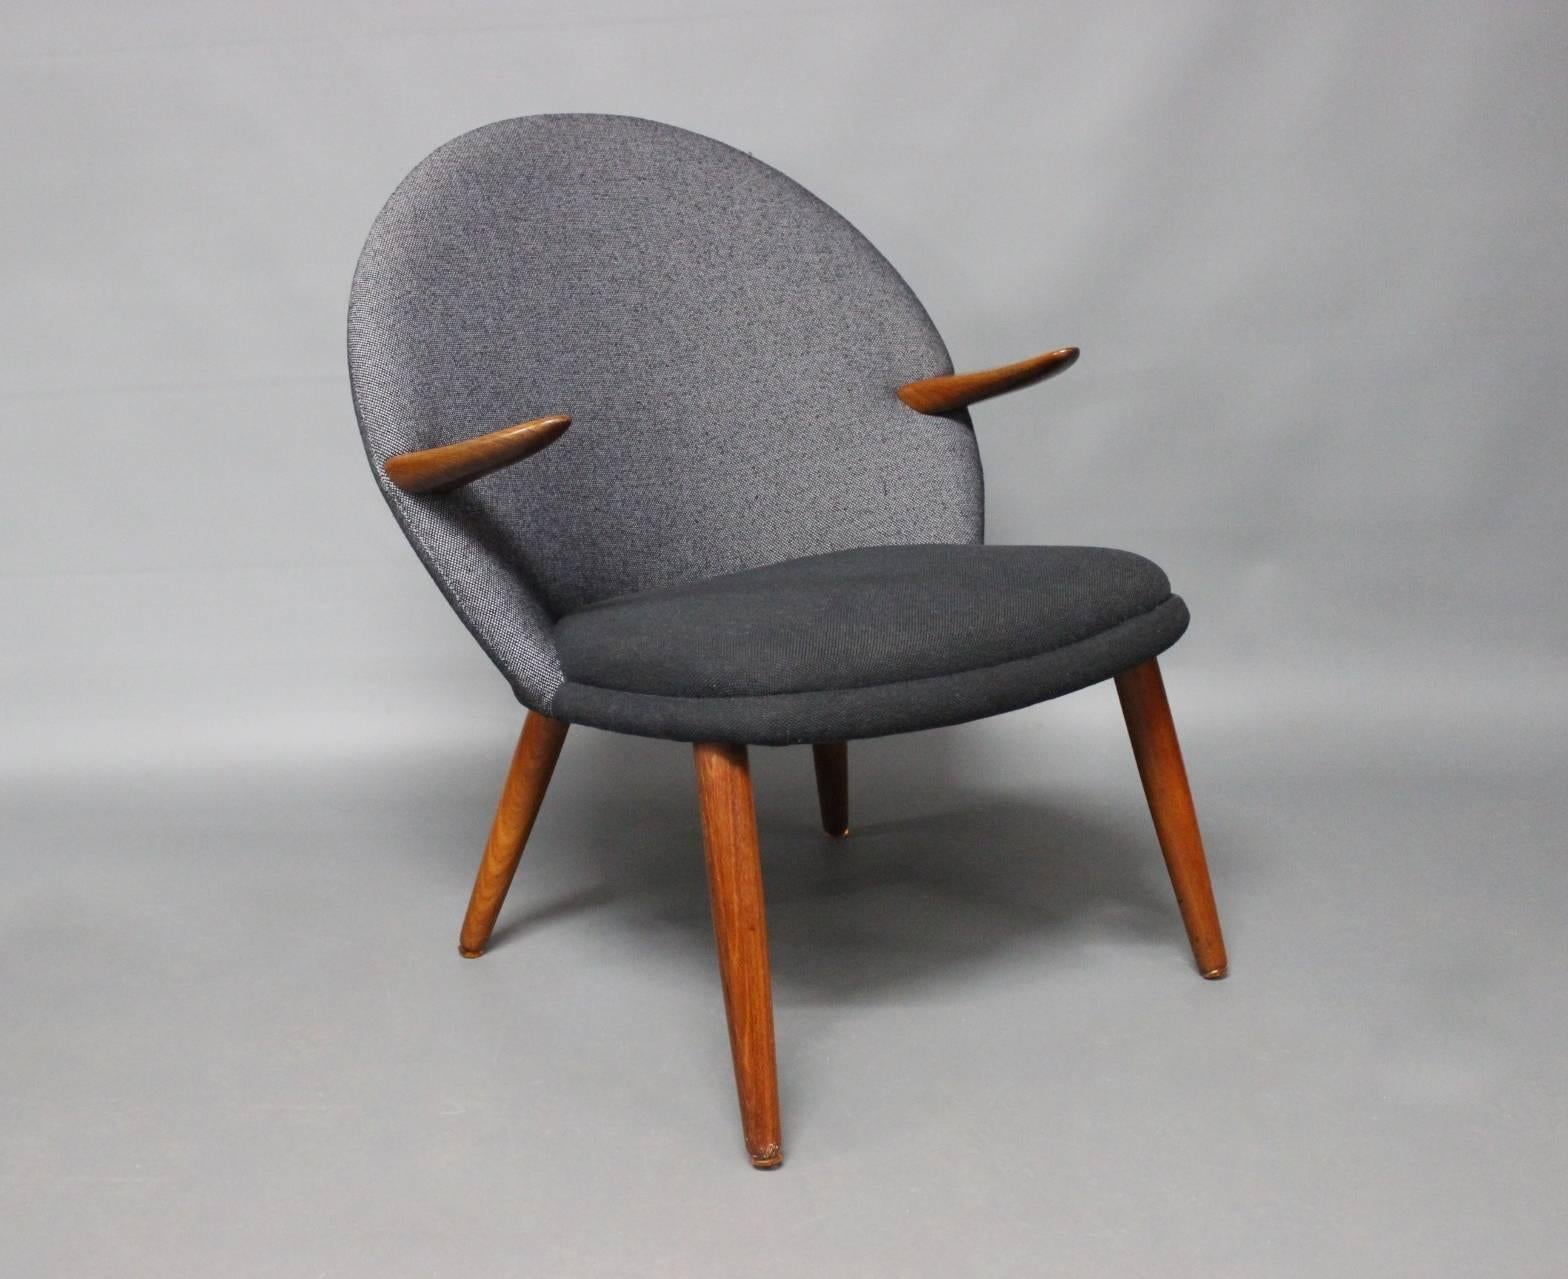 Easy chairs in teak and newly upholstered in grey hallingdal wool designed by Kurt Olsen for Glostrup furniture factory in the 1950s. The chairs can be sold separately.